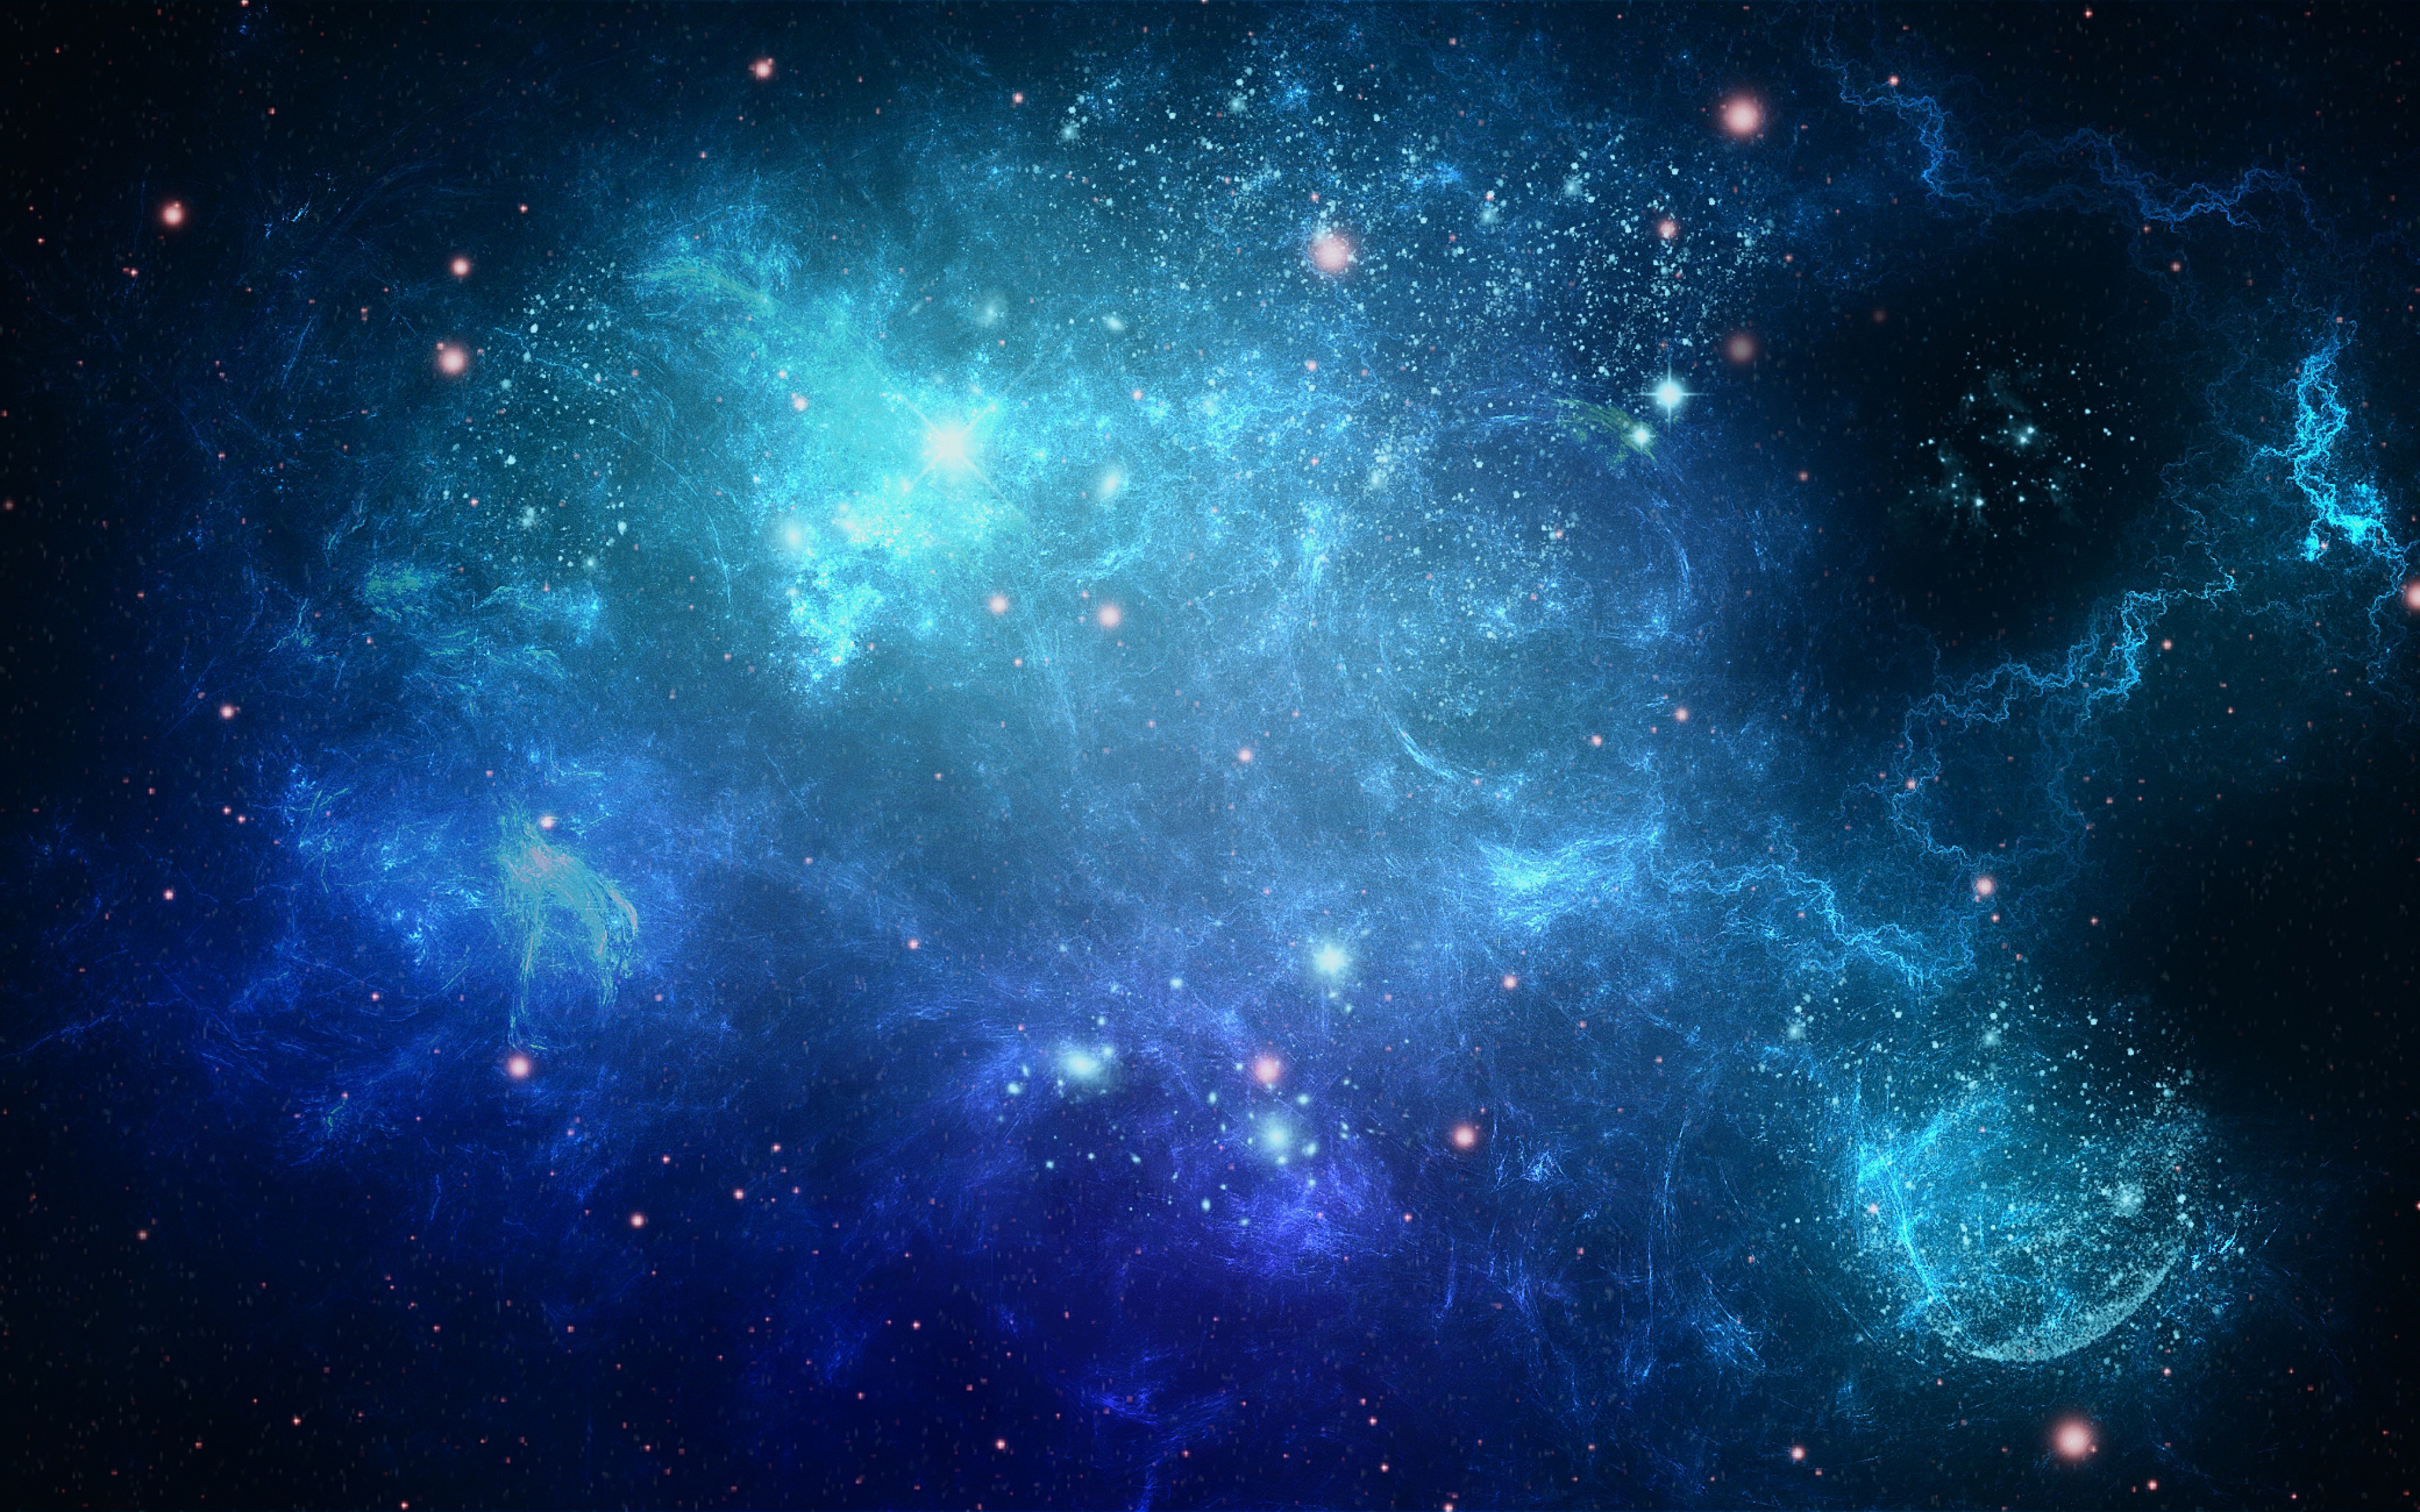  Beautiful Space Star Cluster Galaxy Blue Violet Gas Pattern Wallpaper